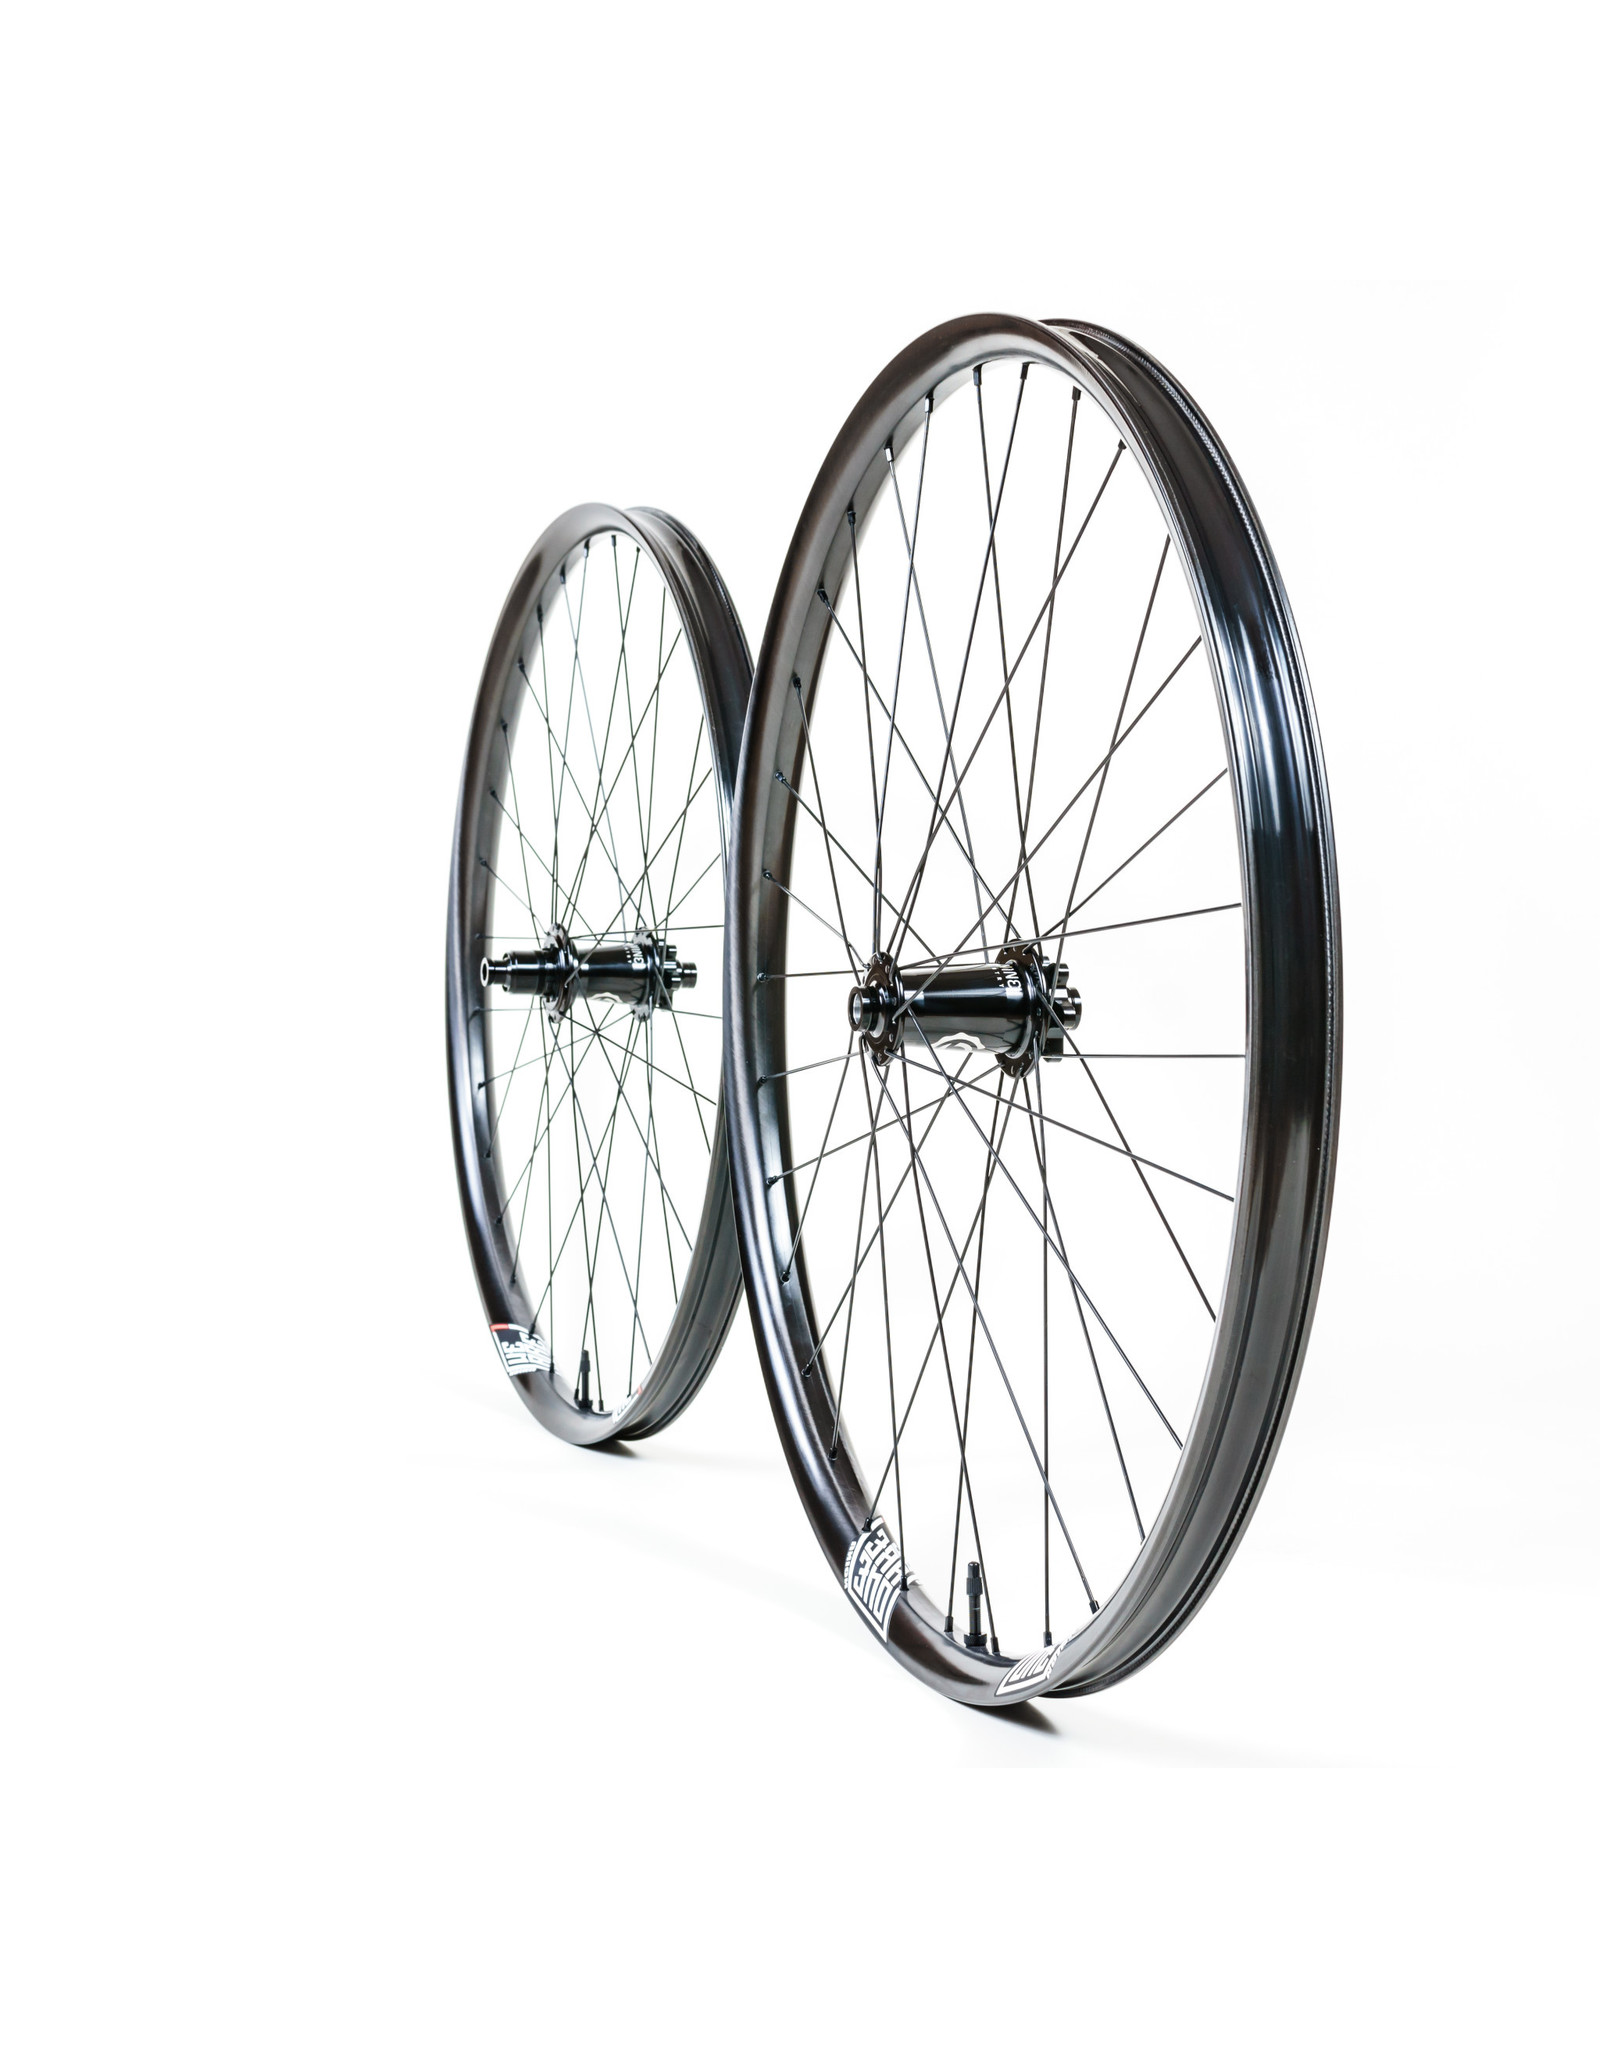 We Are One Composites We Are One Revive 29 Wheelset (Non-Boost) - Industry 9 1/1 (SRAM XDR, CL, Sapim Race)